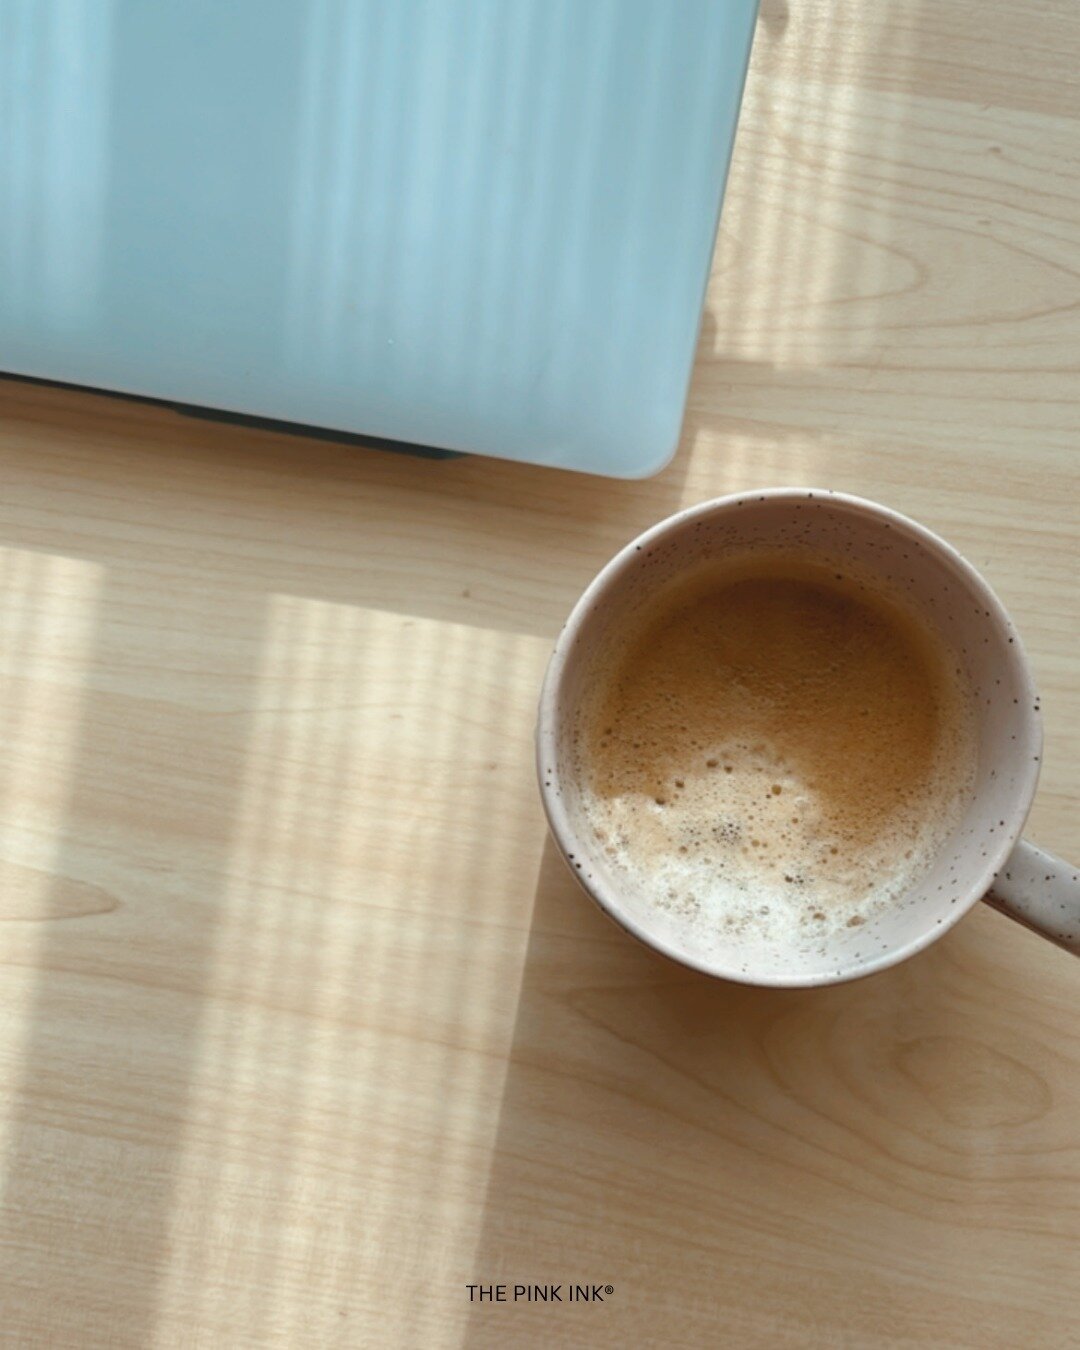 Start your day the right way: with a cup of coffee and your digital planner! ☕️⁠
⁠
There's something magical about that first sip of coffee while planning out your day ahead.⁠
⁠
Let's kickstart our mornings with productivity and a dose of caffeine-fu